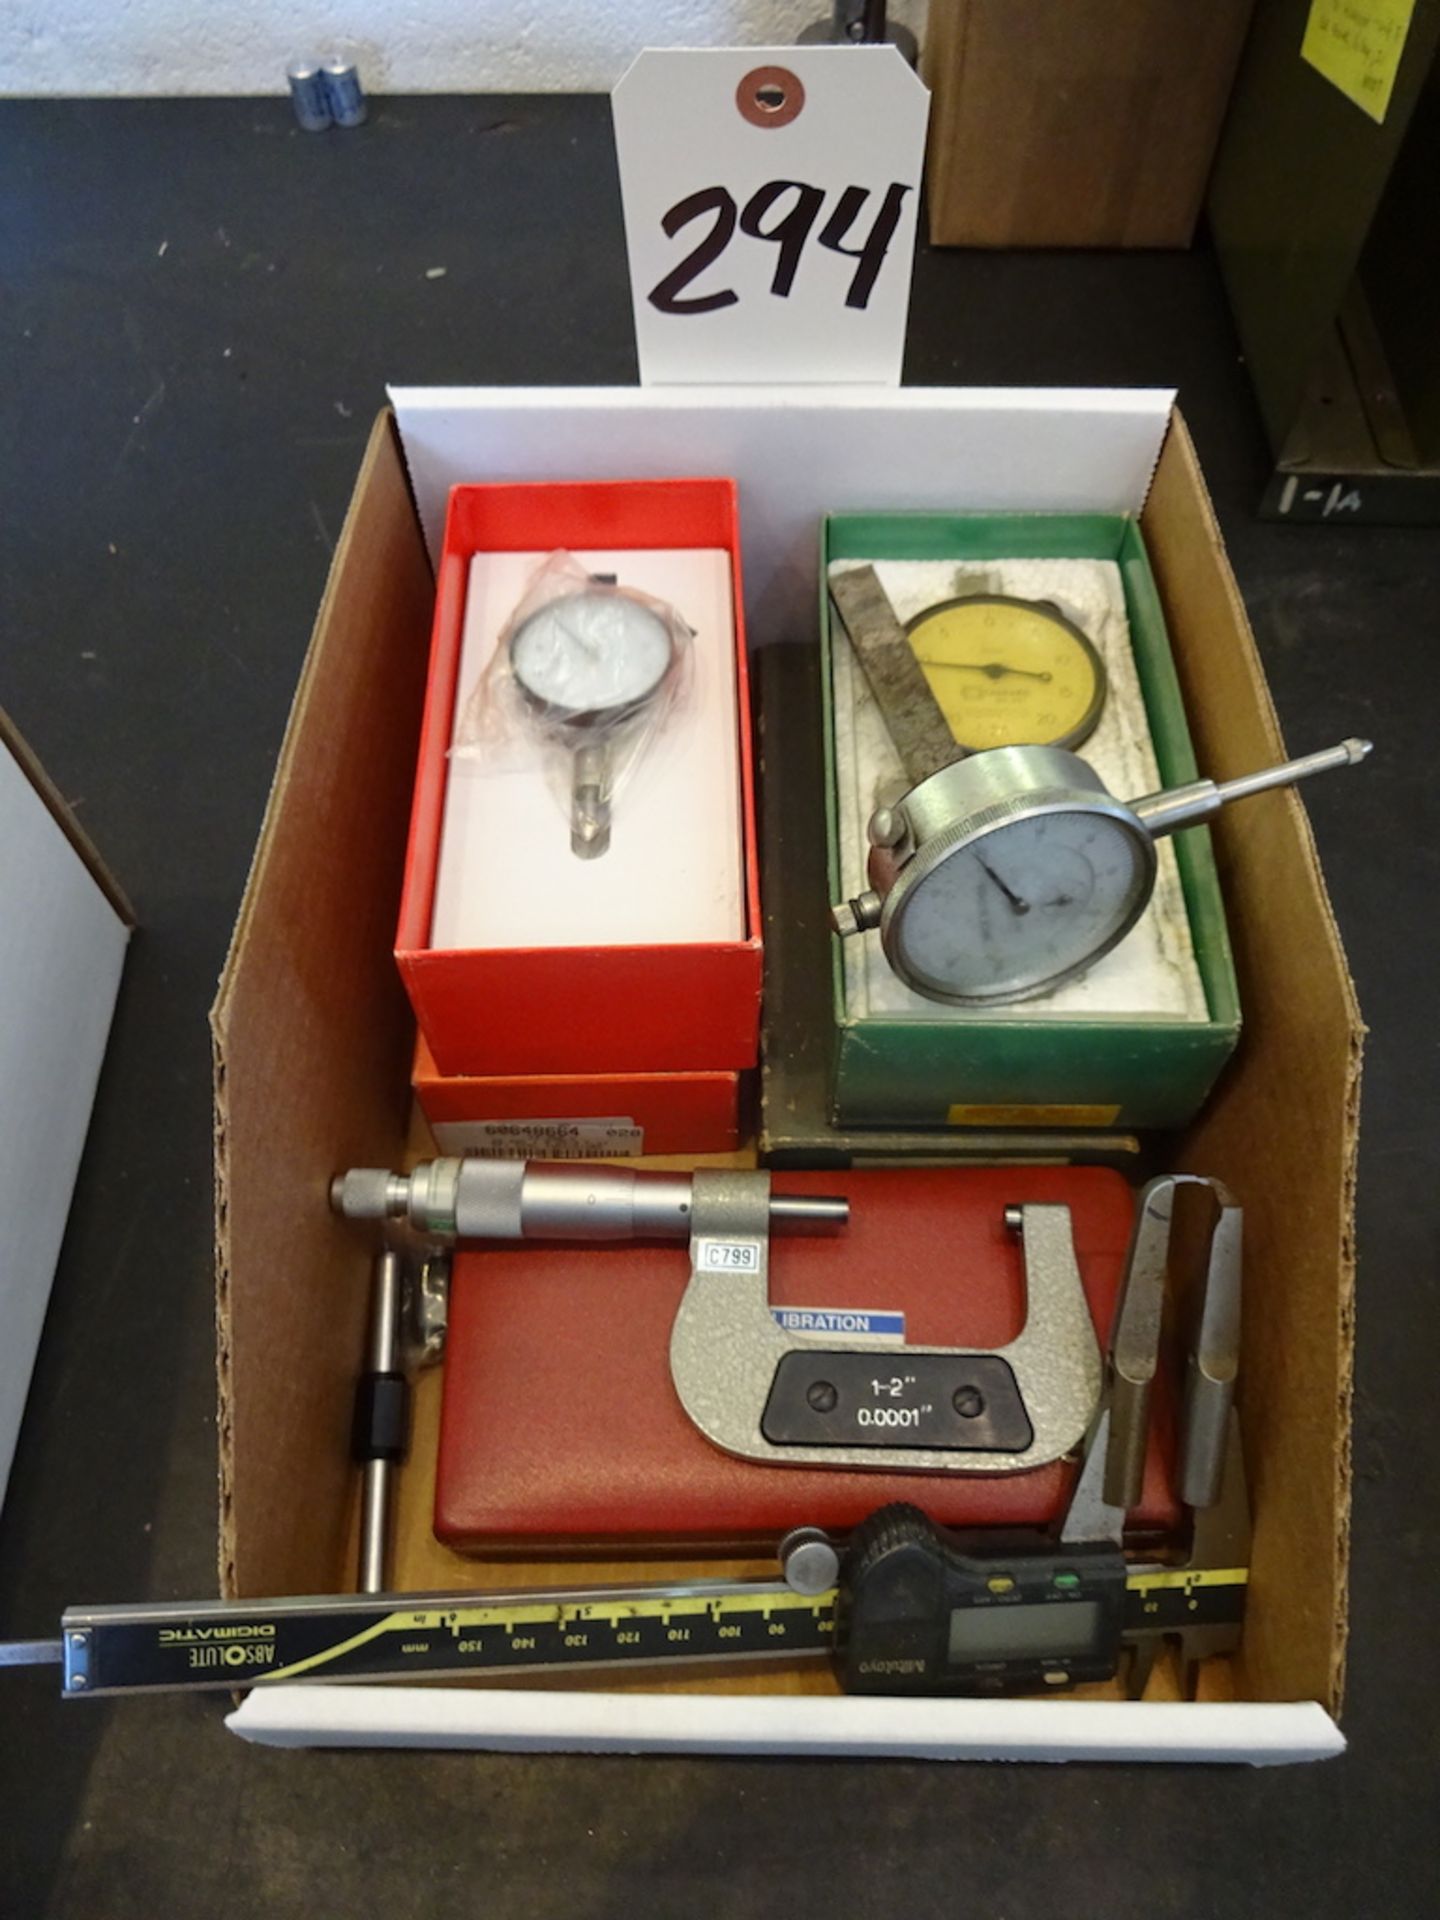 LOT: Assorted Inspection Equipment including (3) Dial Indicators, Mitutoyo Digimatic Caliper, 1